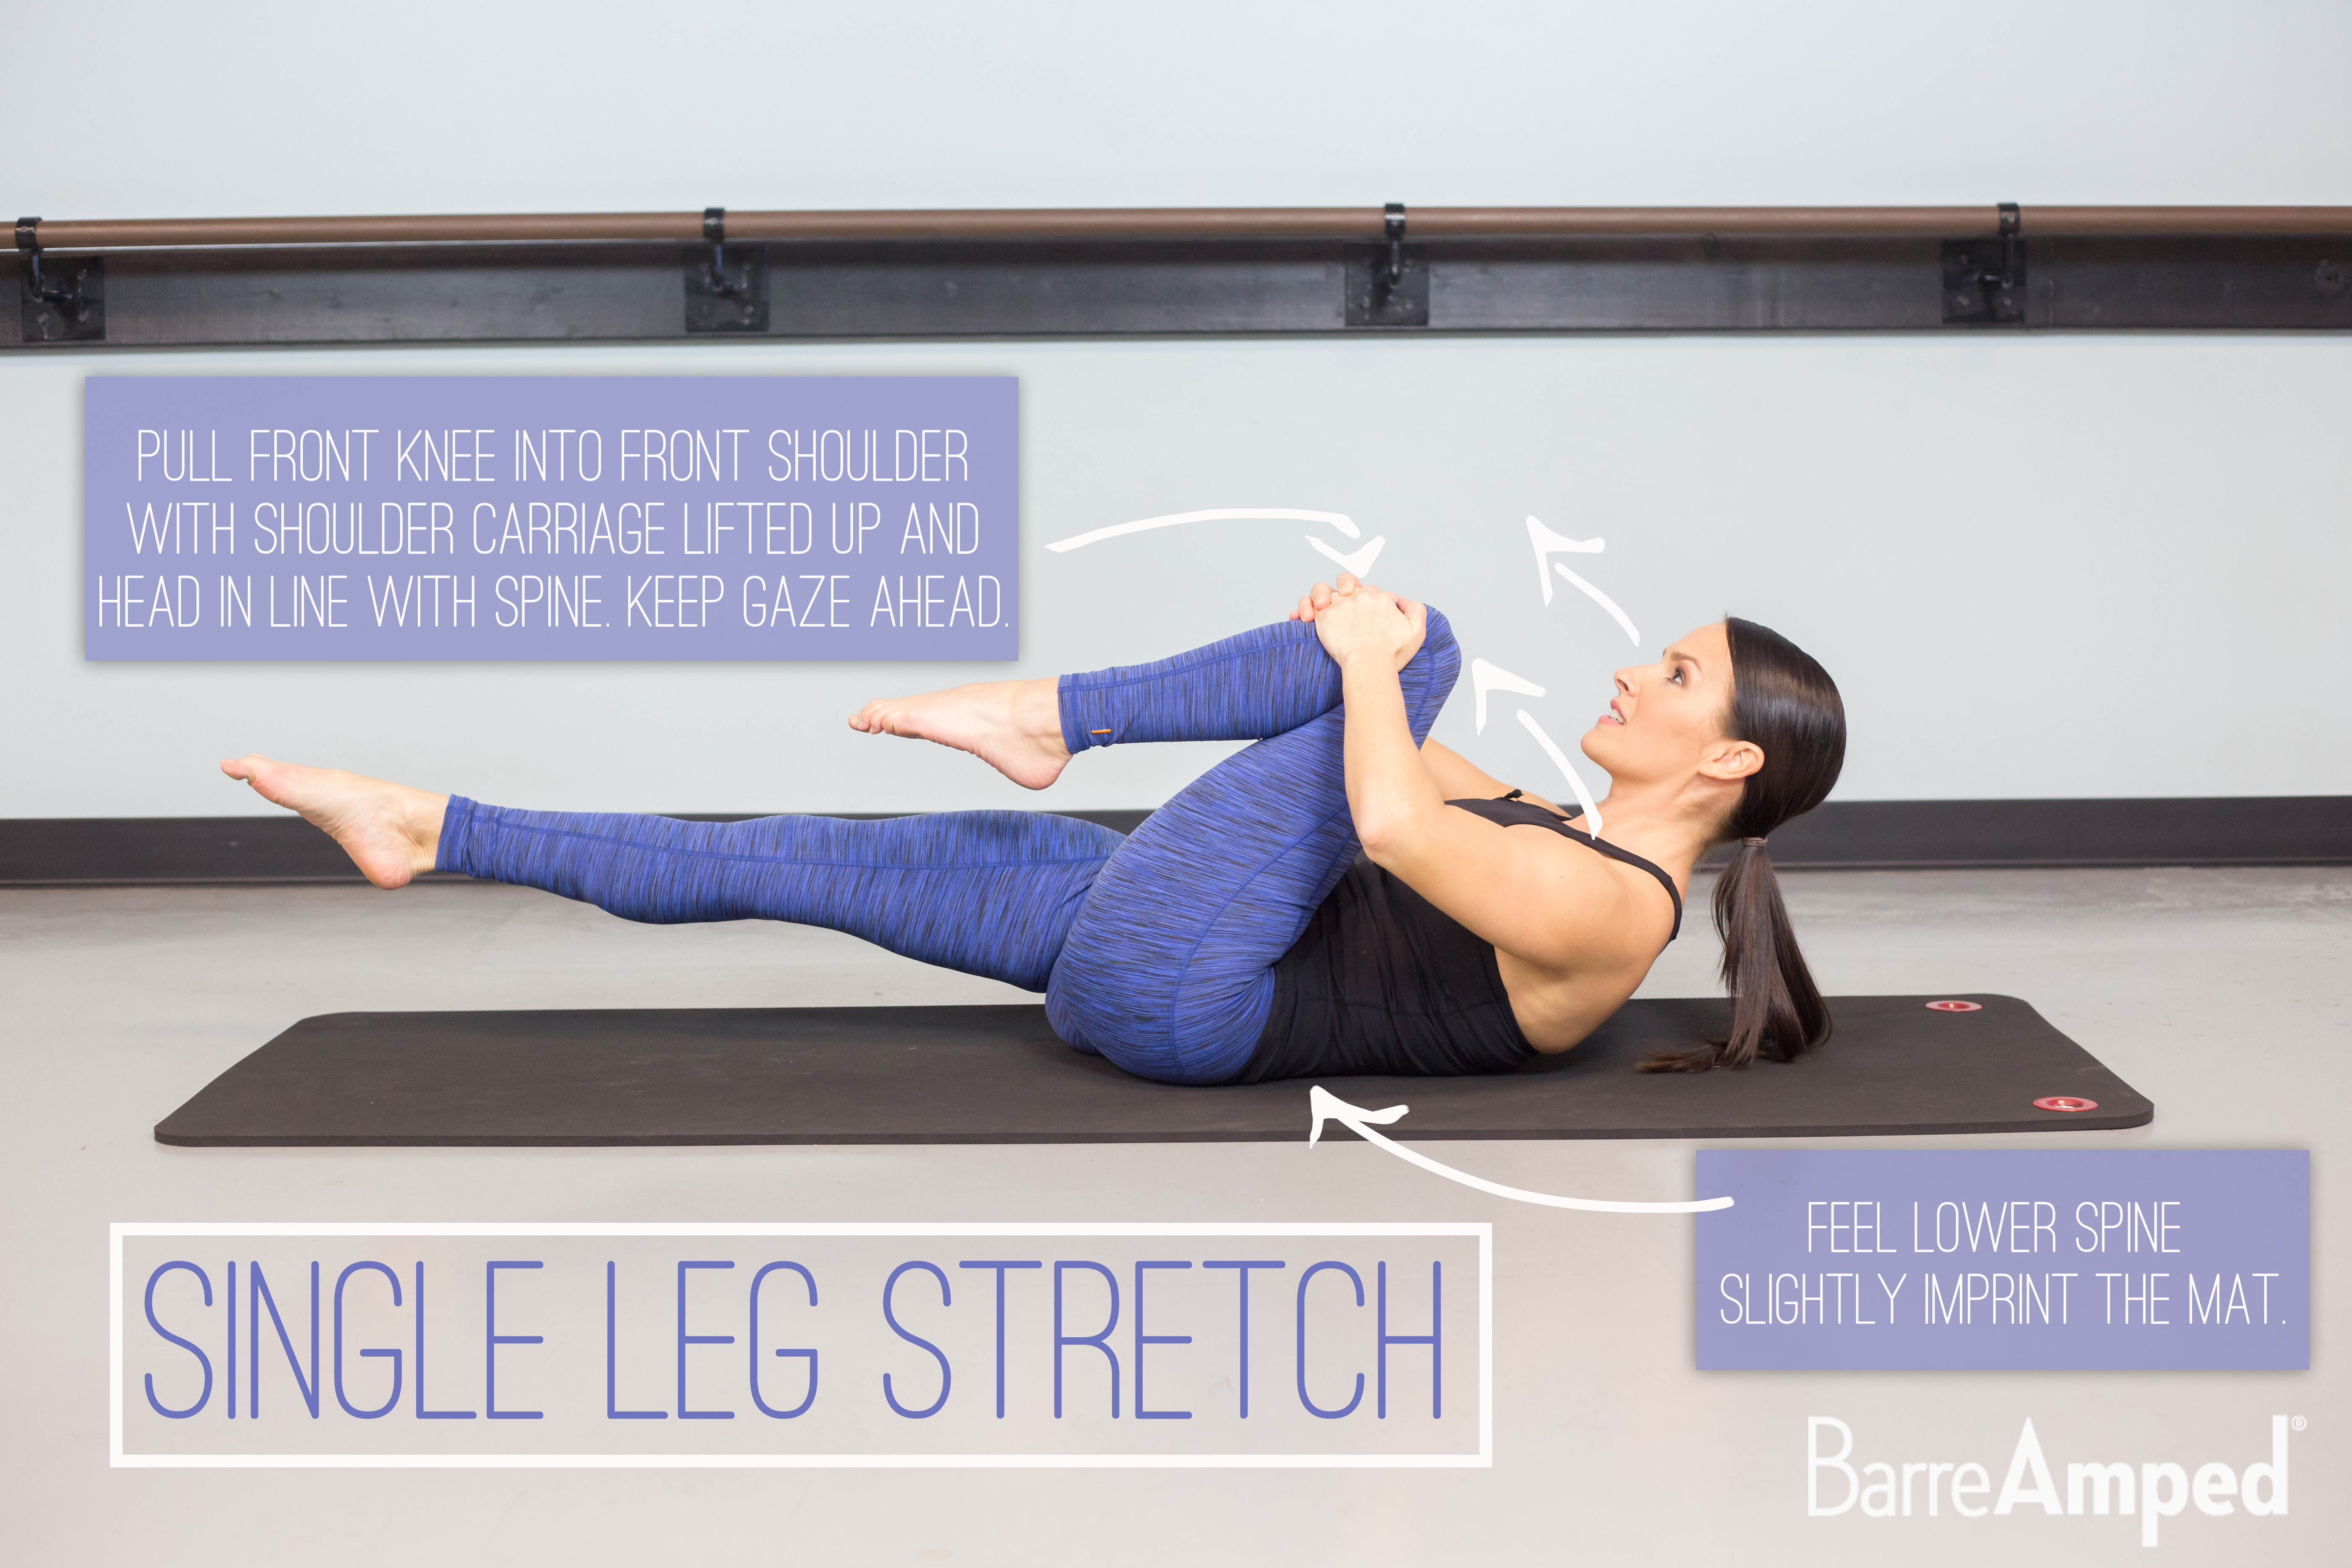 Abs on Fire: Ab Workout from BarreAmped